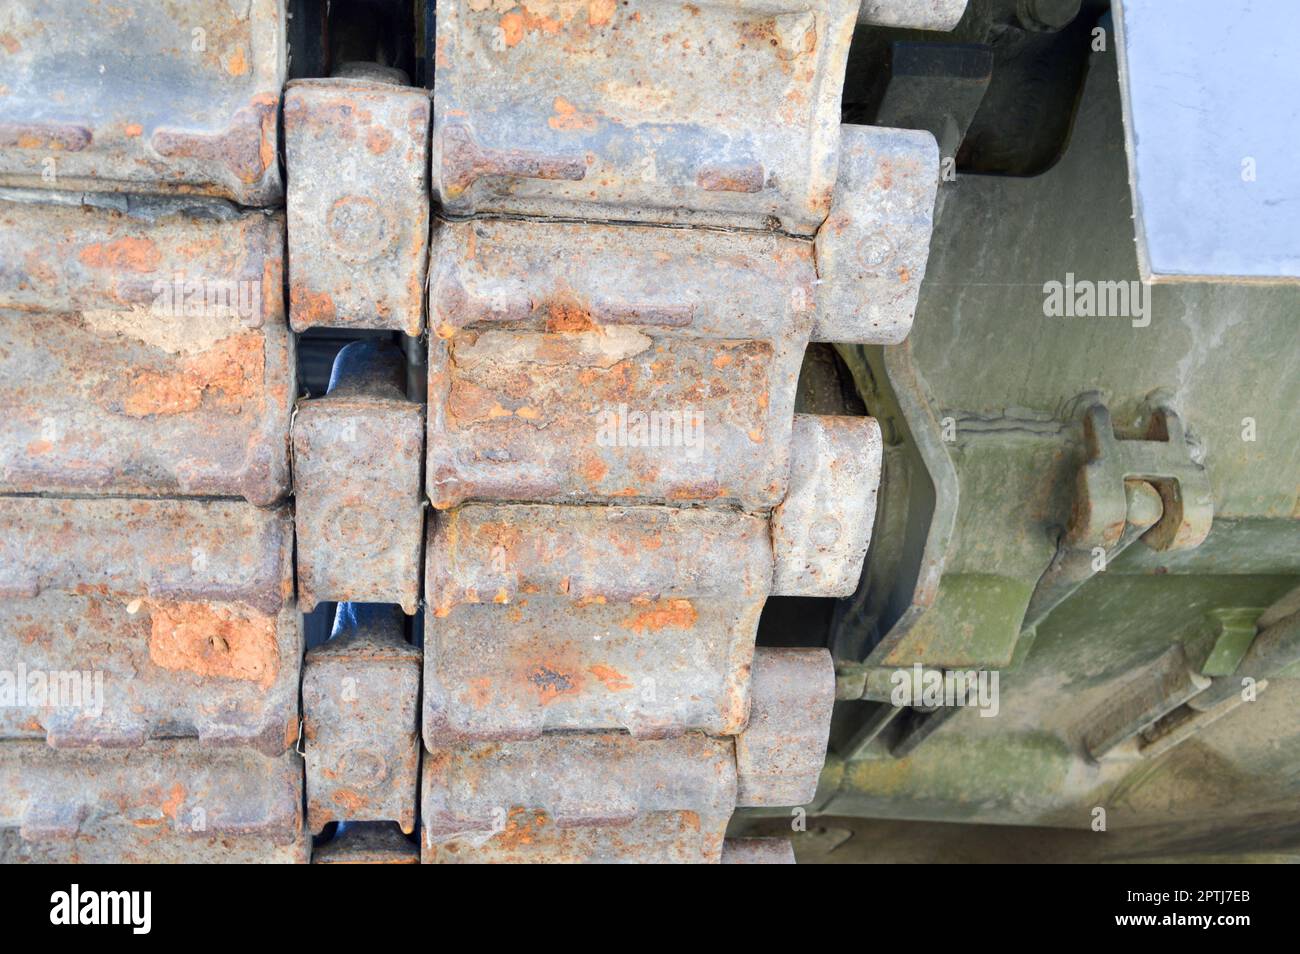 Rusty iron dirty metal heavy track caterpillar of a large green military off-road armored deadly dangerous Russian Syrian battle tank and bottom. Stock Photo